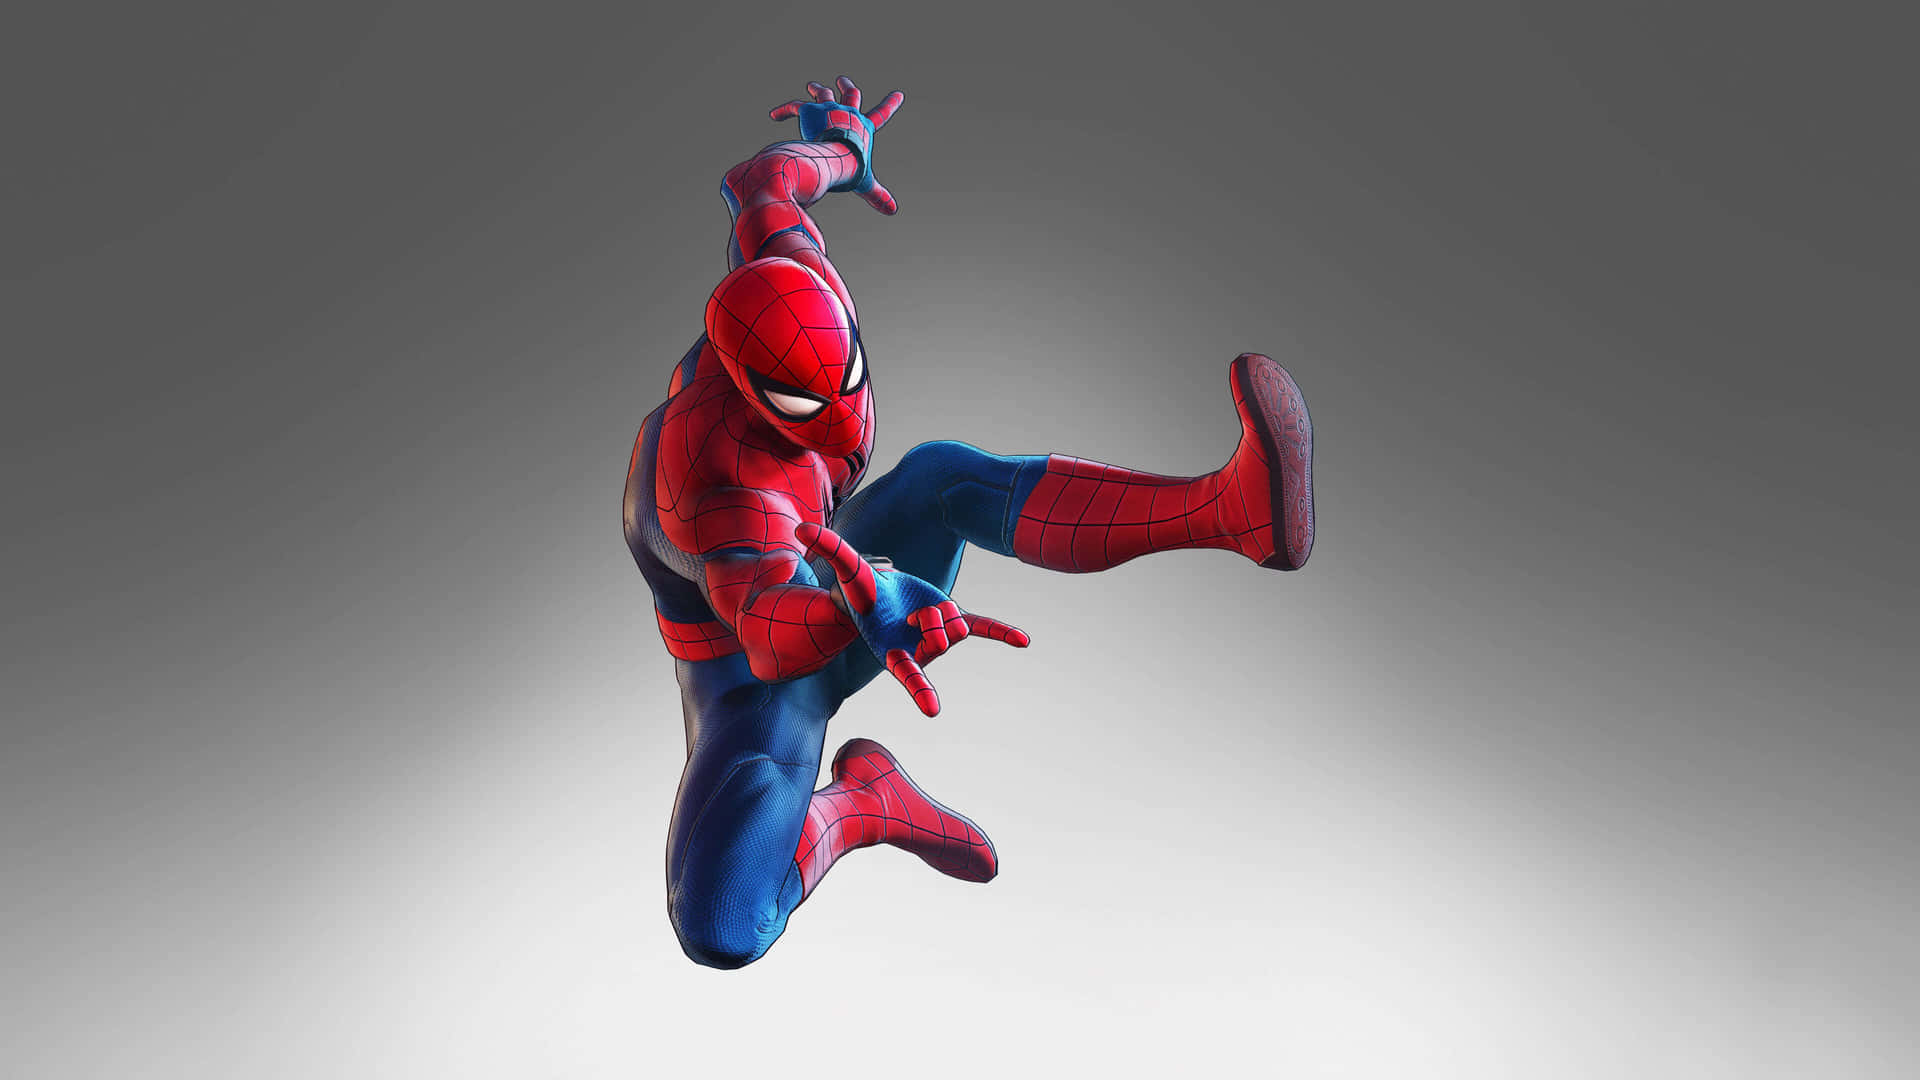 Spider Man Jumping In The Air Wallpaper